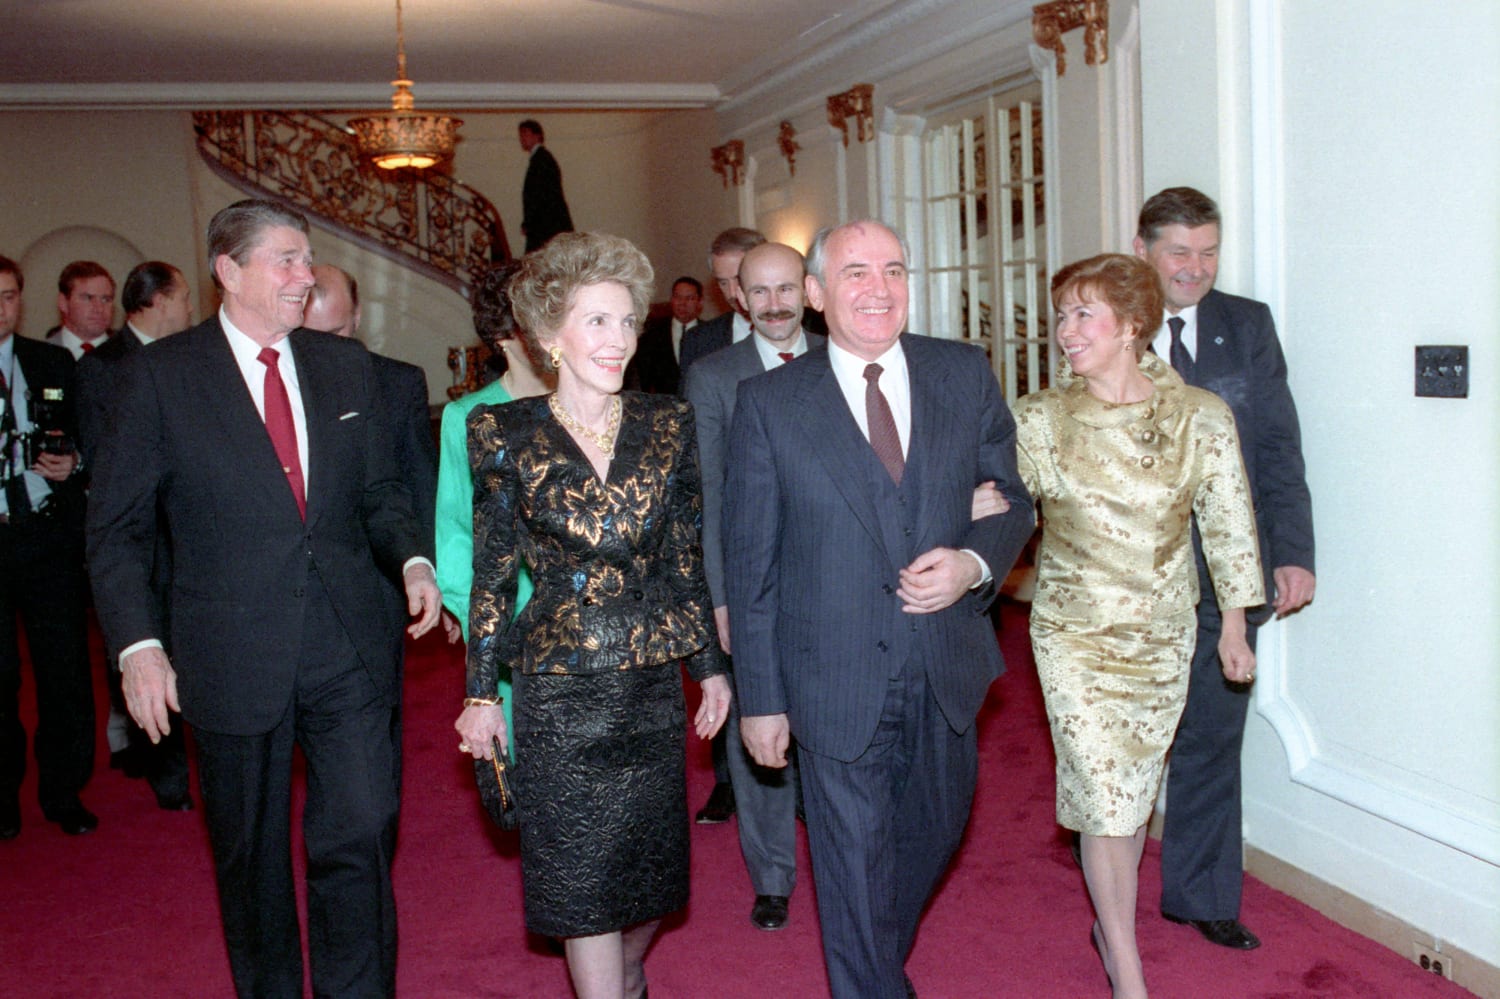 The Reagans and the Gorbachevs on their way to dinner at the Soviet Embassy in Washington D.C. December 9th 1987 [4,,665]